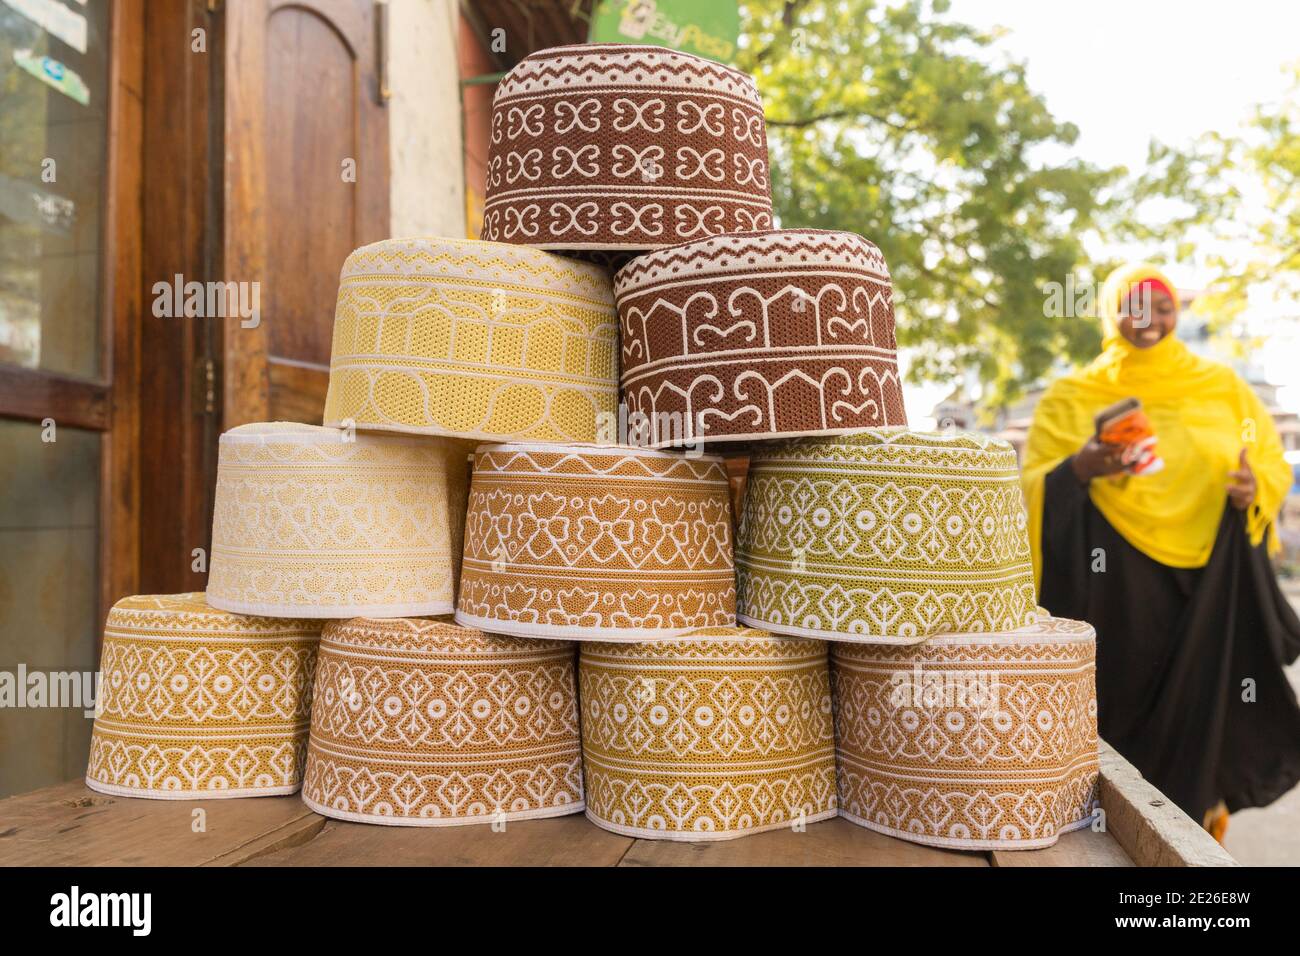 Pyramid of Kofia Hats For Sale In The Market Stock Photo